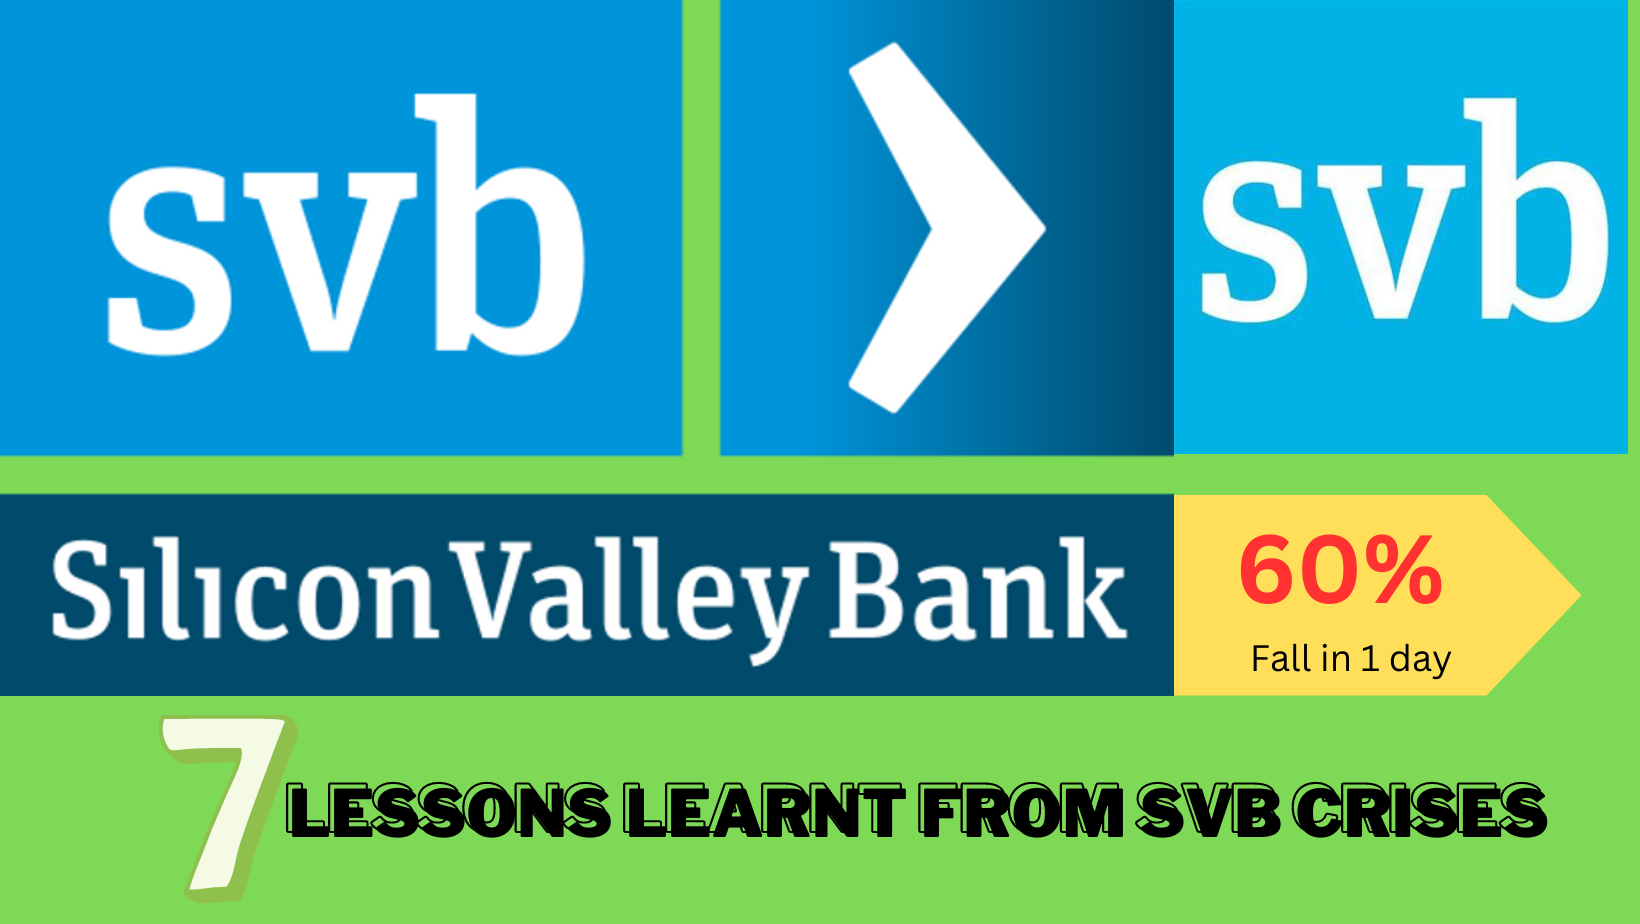 Lesson learnt from Silicon velley bank svb crises